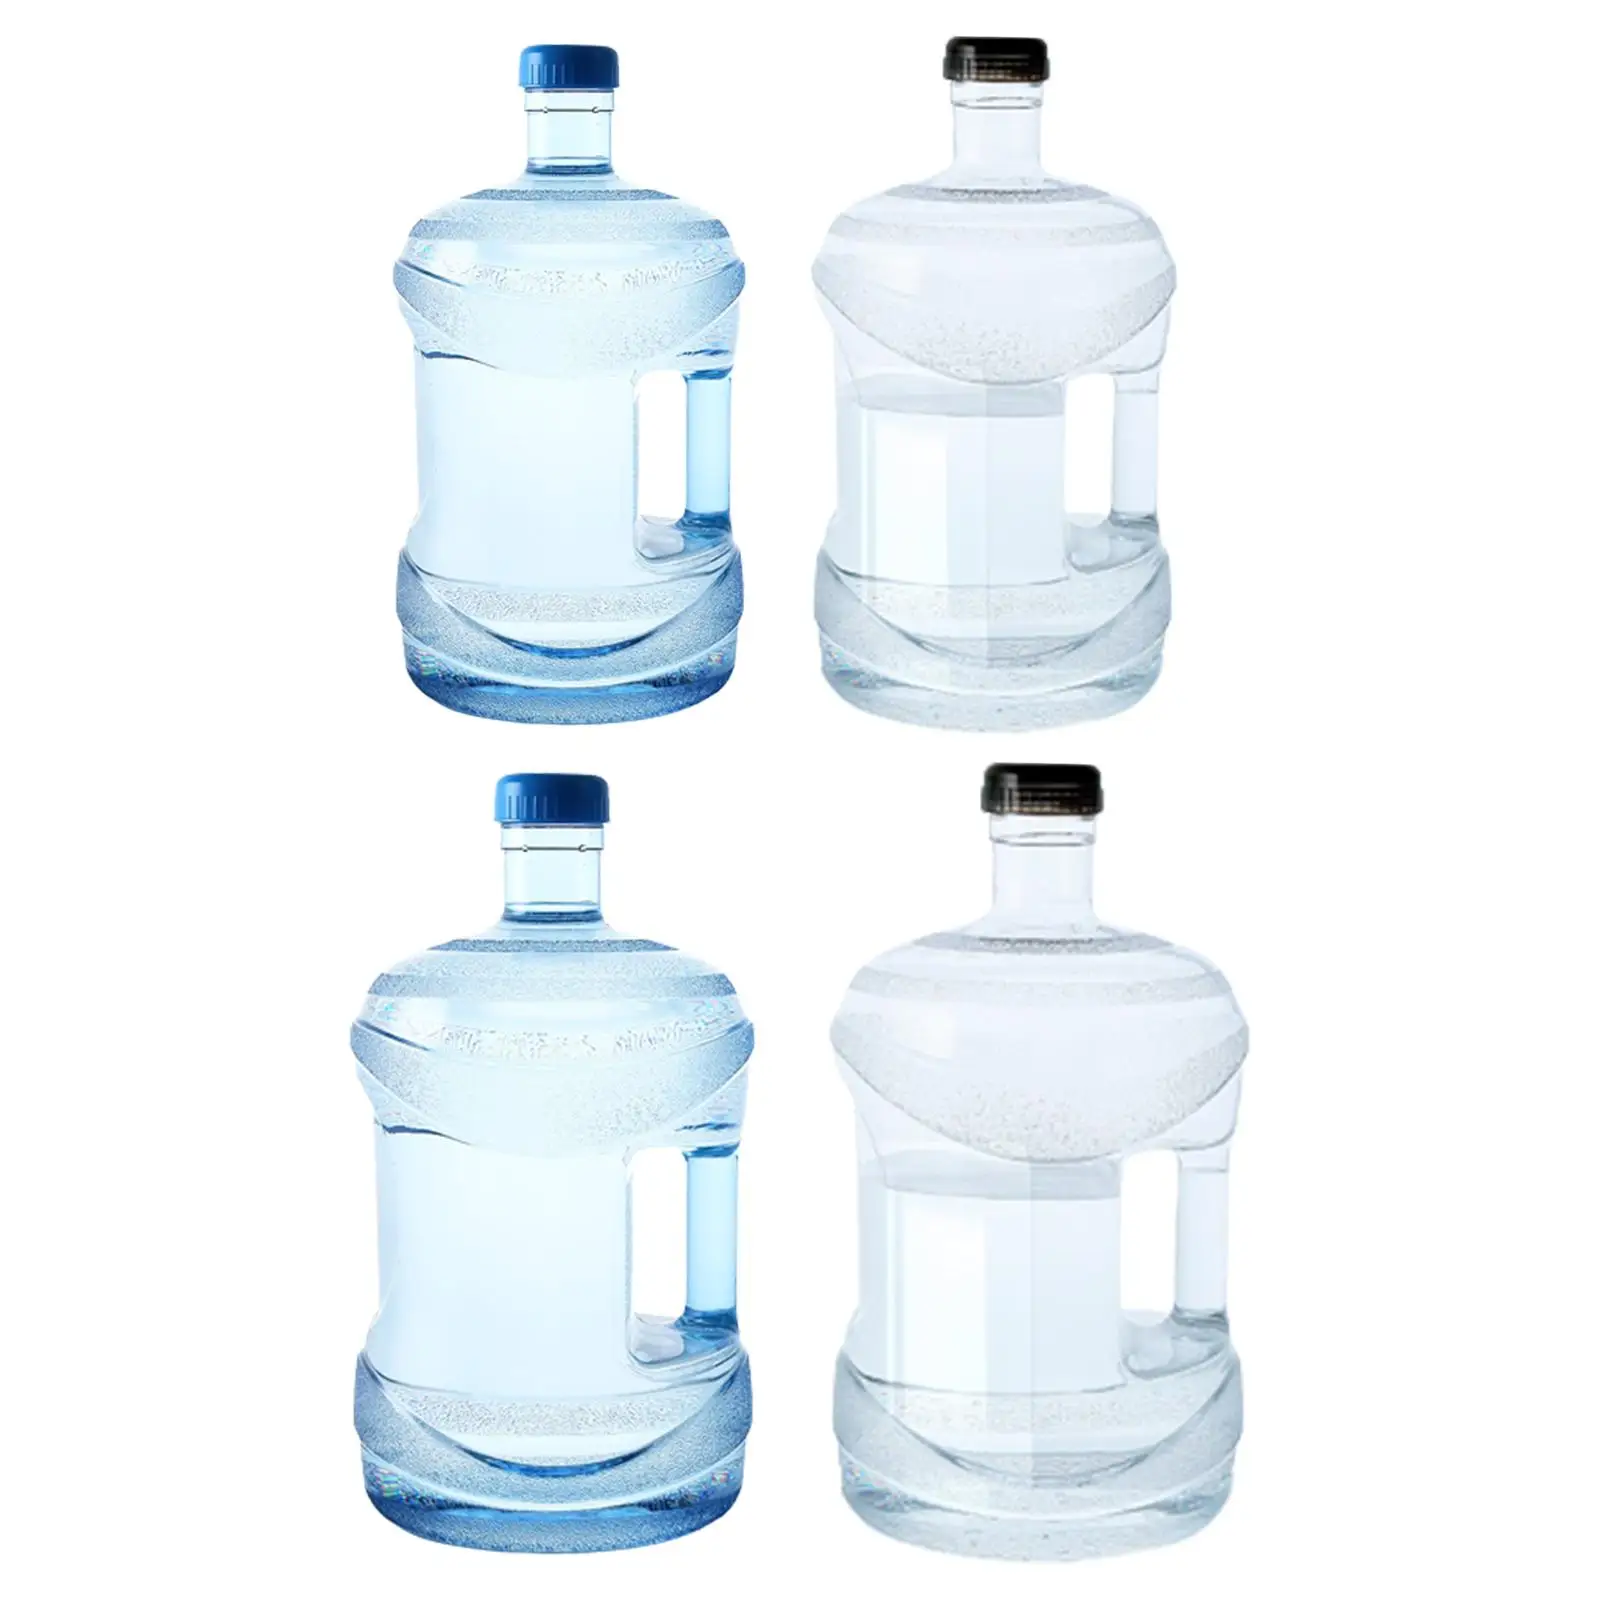 Water Dispenser Bottle Large Capacity Reusable Round Water Bottle Carrier Water Barrel for Camping Tea Set Kitchen Fitments